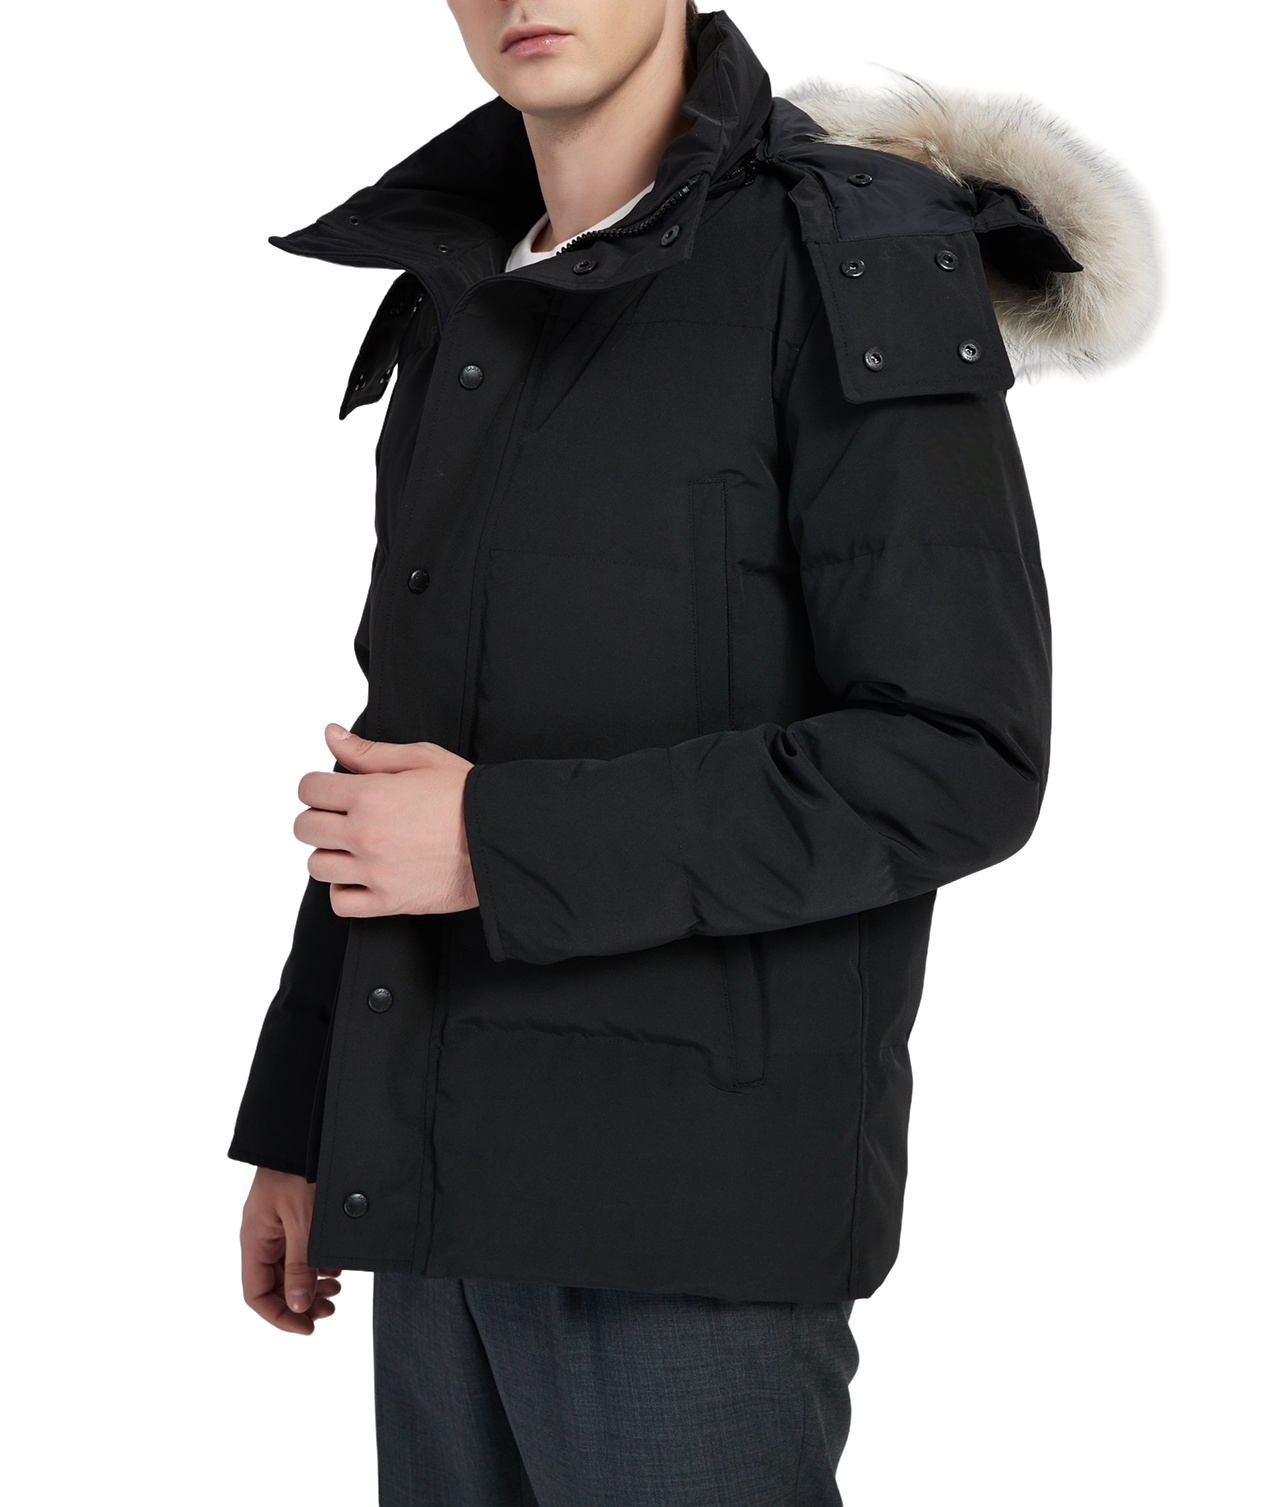 Winter mens coat outdoor leisure sports down jacket goose white duck windproof parker long leather collar cap warm real wolf fur stylish classic coats